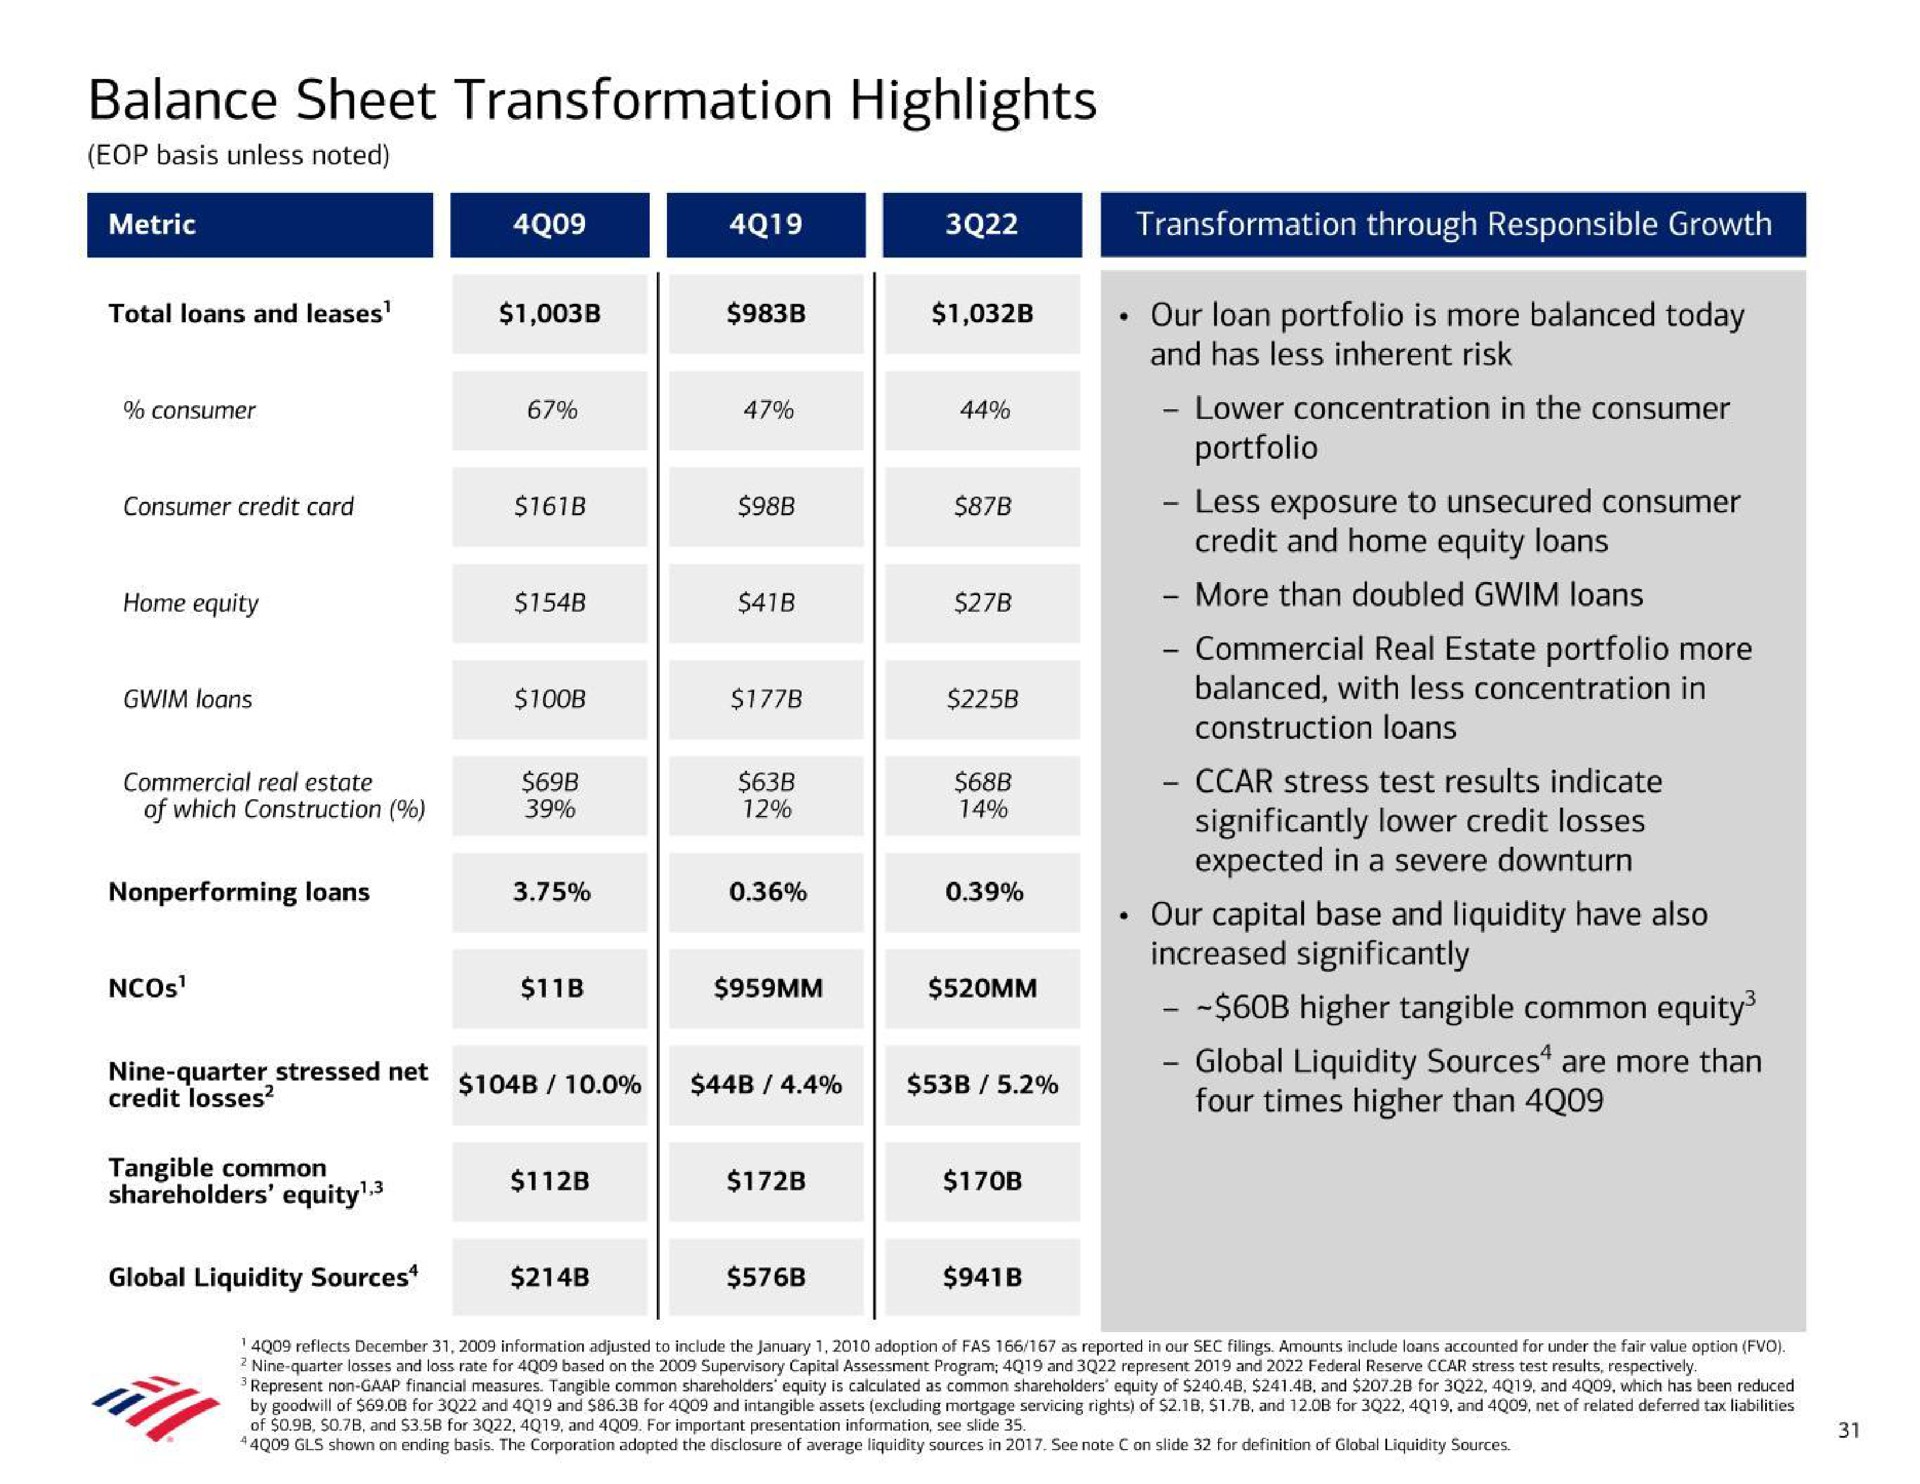 balance sheet transformation highlights total loans and leases our loan portfolio is more balanced today home equity commercial real estate of which construction a a and has less inherent risk portfolio credit and home equity loans more than doubled loans commercial real estate portfolio more balanced with less concentration in construction loans stress test results indicate significantly lower credit losses expected in a severe downturn our capital base and liquidity have also increased significantly higher tangible common equity toe global liquidity sources are more than four times higher than | Bank of America